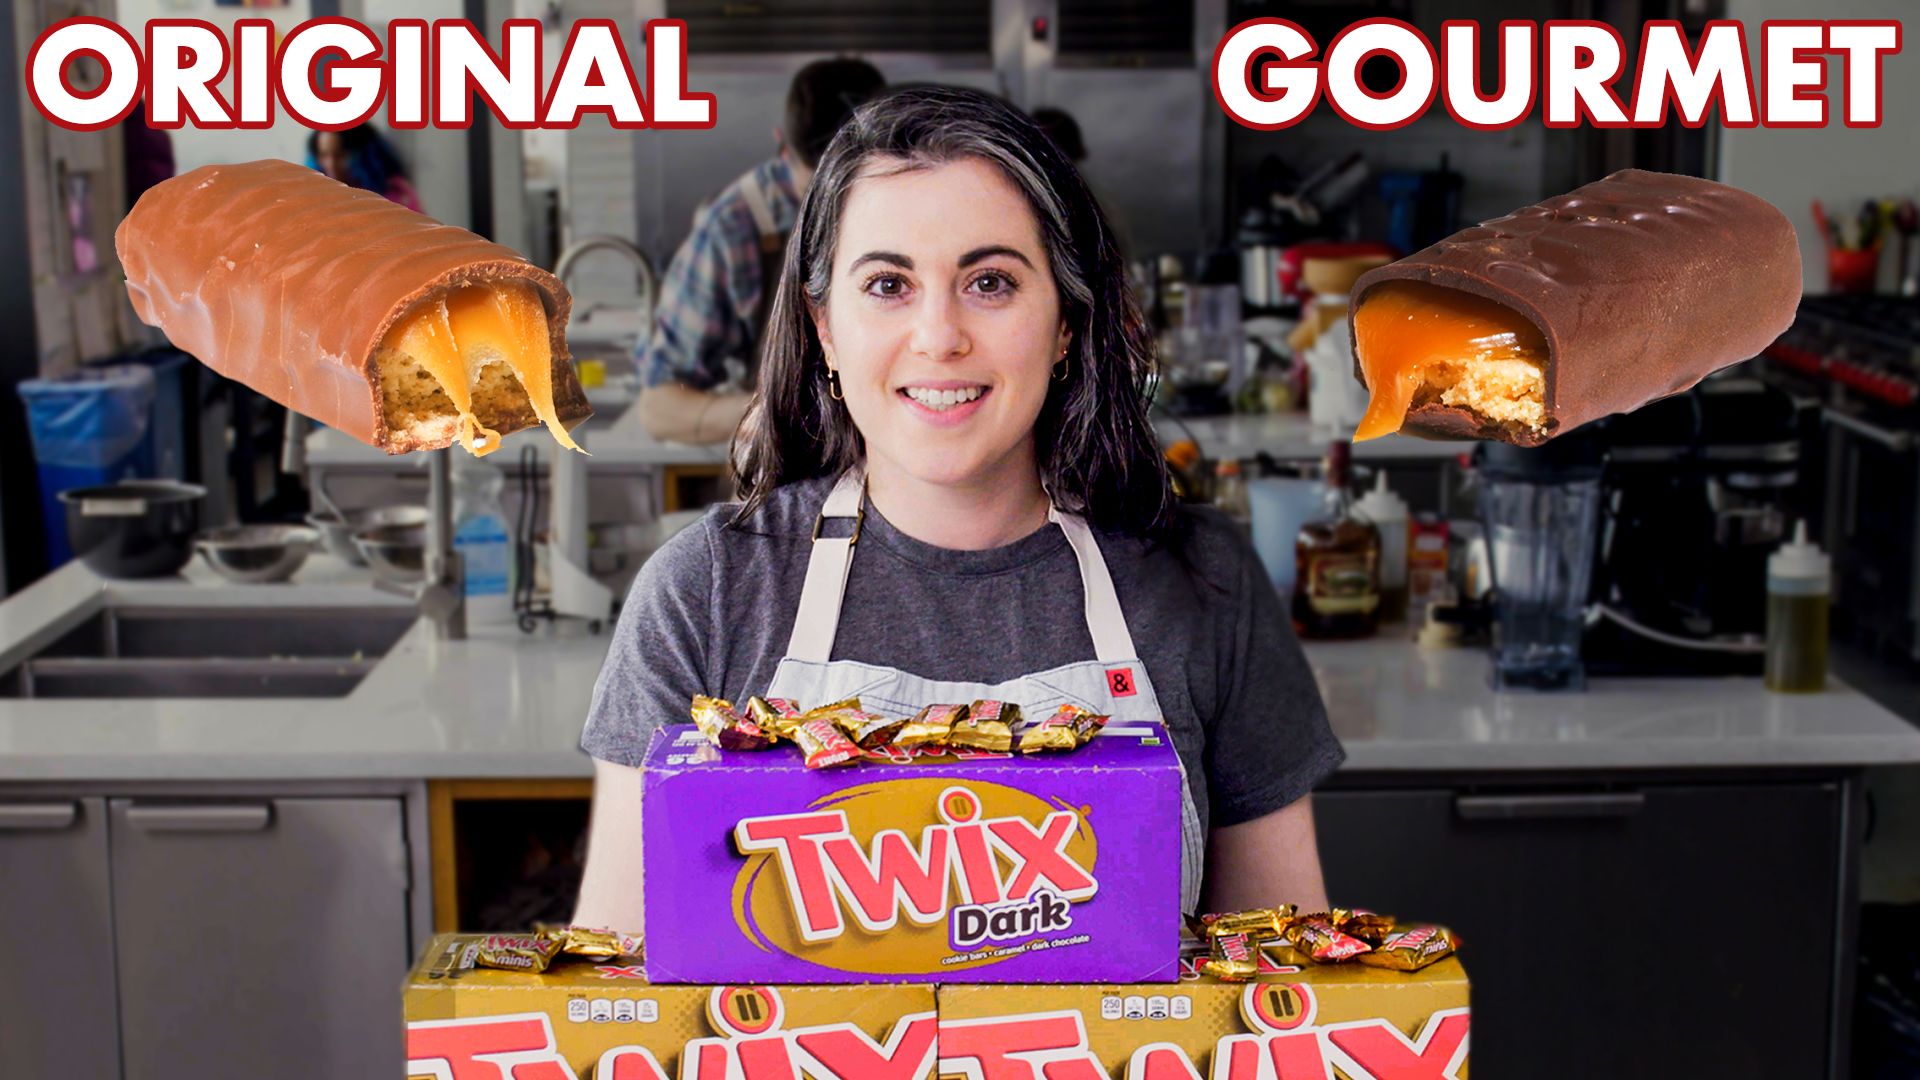 Watch Pastry Chef Attempts To Make Gourmet Twix Gourmet Makes Bon